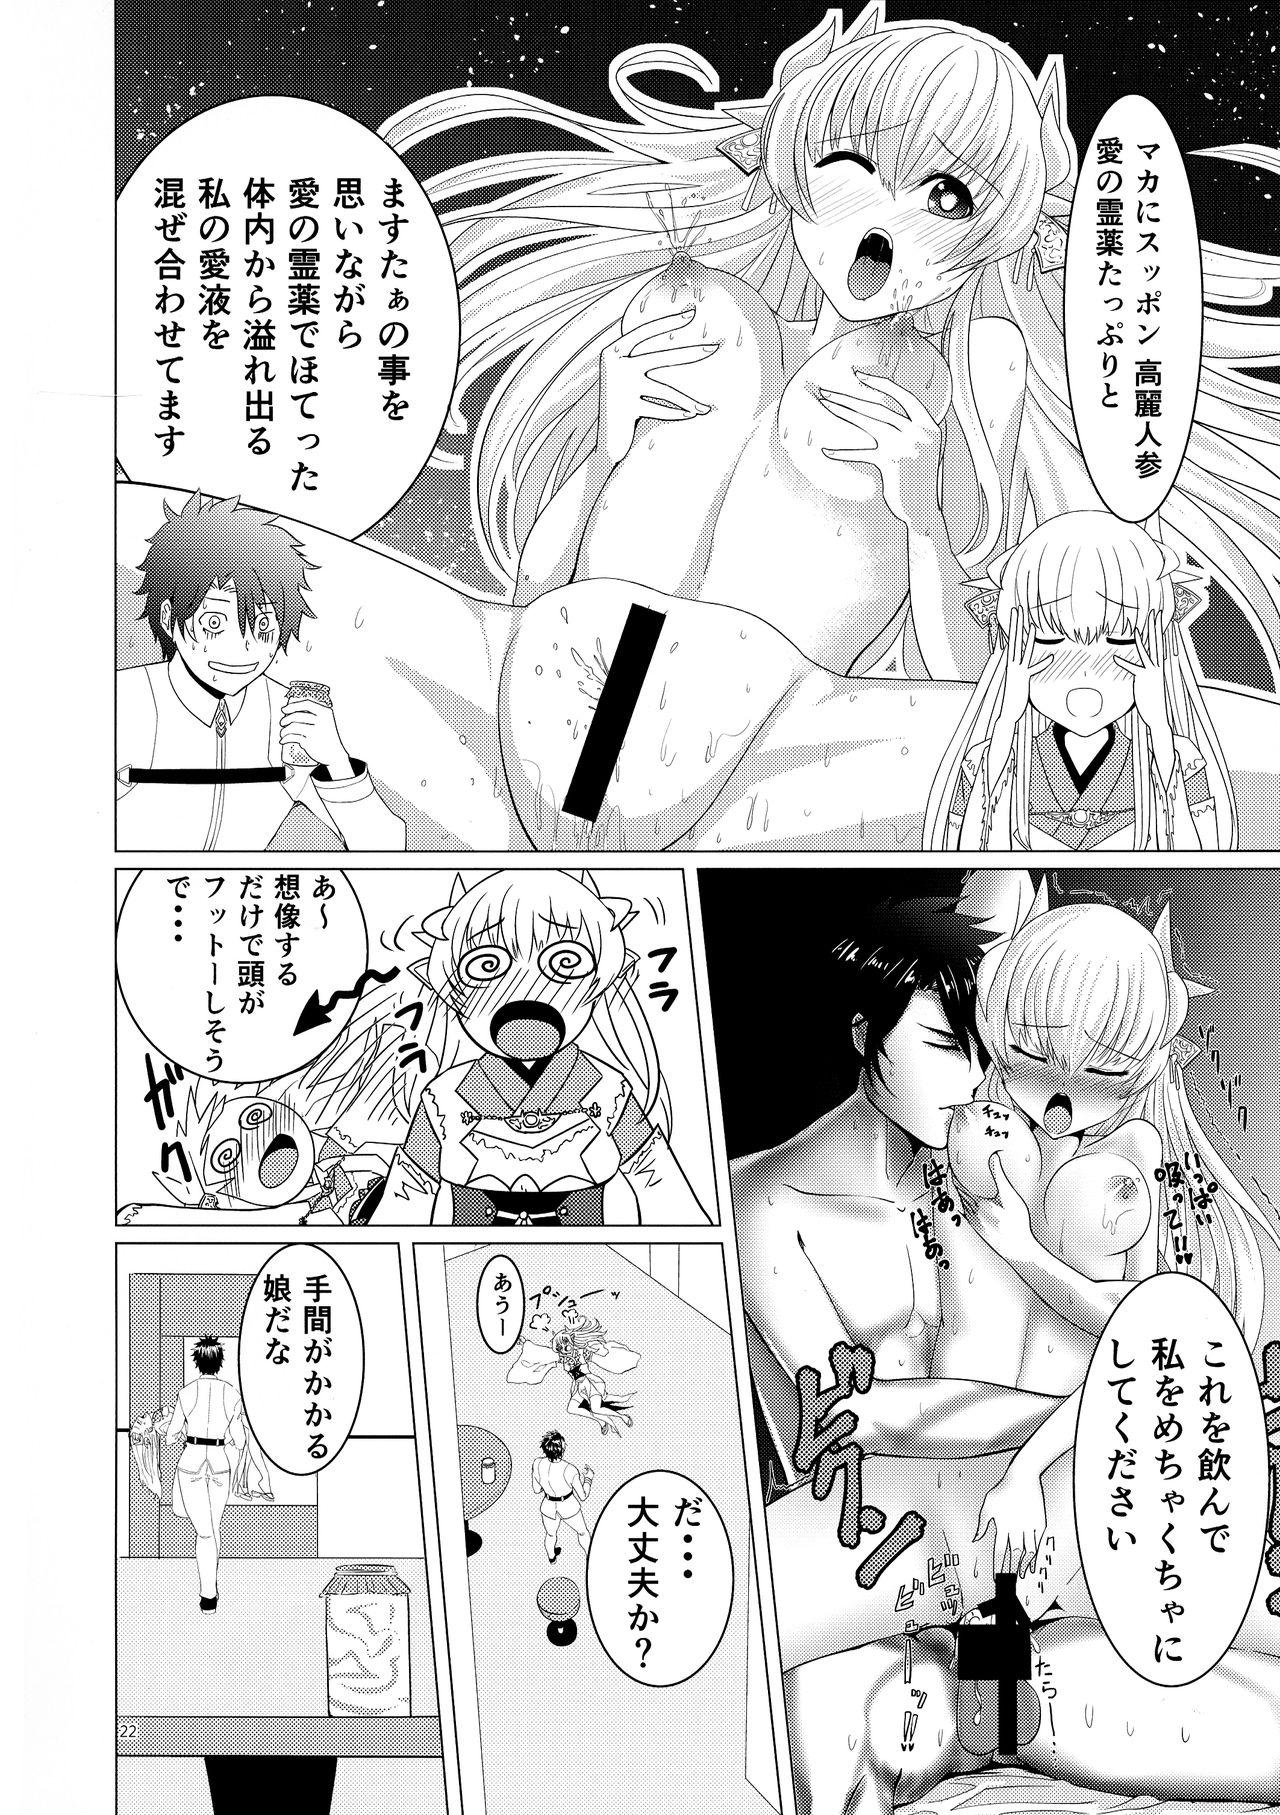 Matching Spirits - Jeanne and Astolfo have sex 18